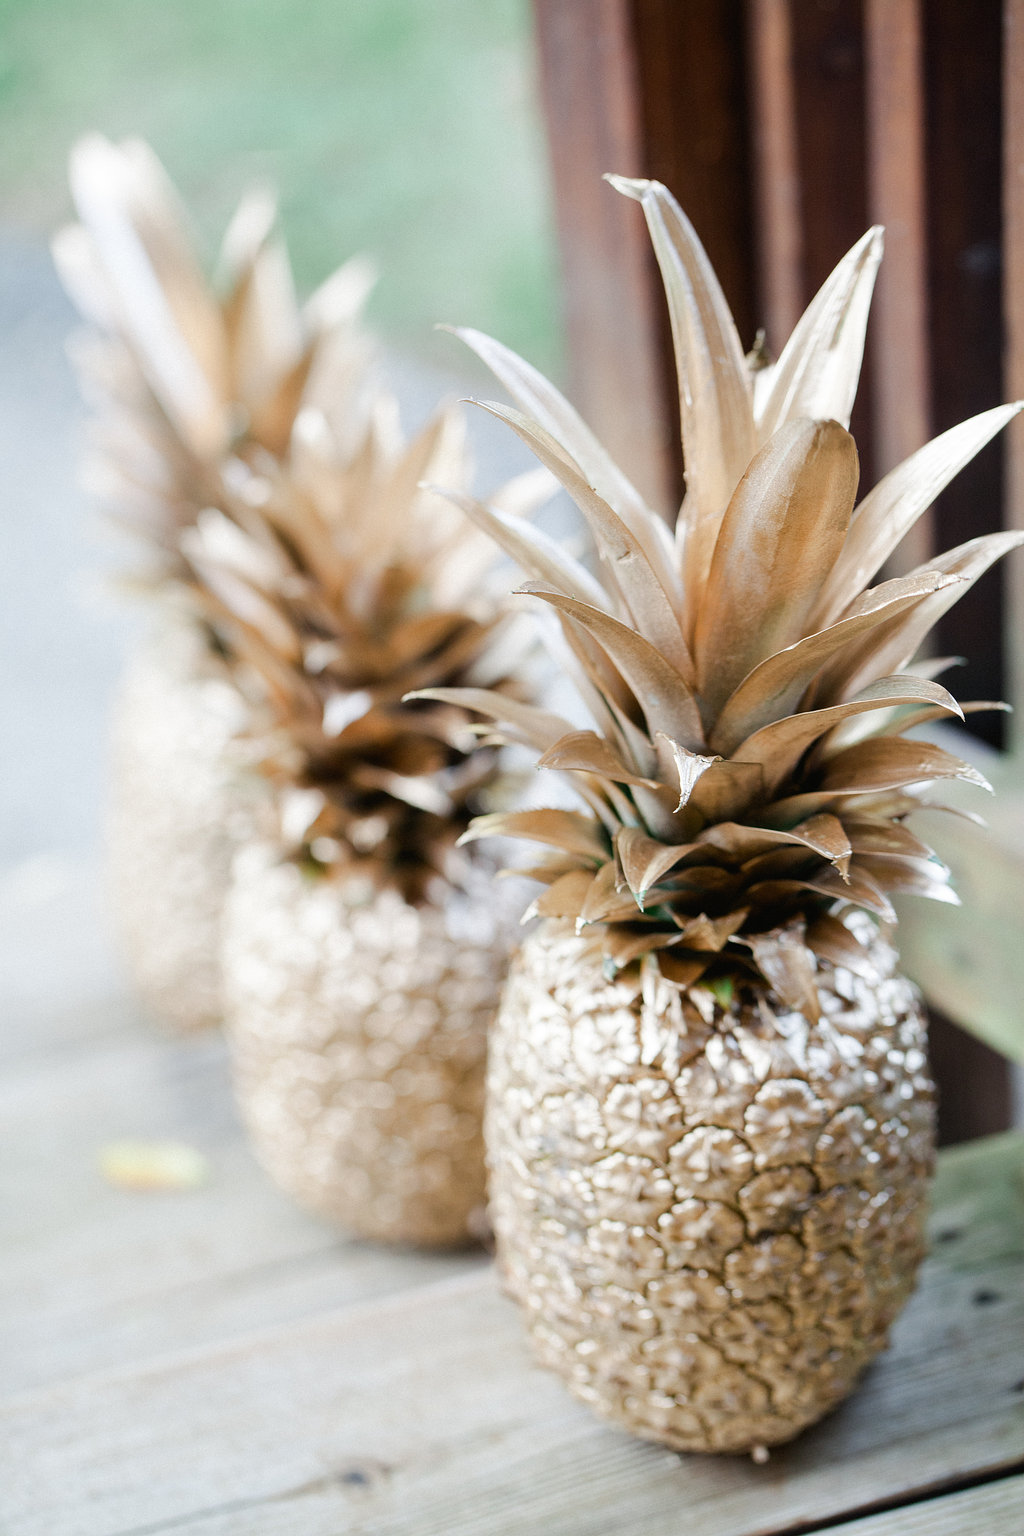 Spray Paint Pineapple Is Easy And Cheap Decor That Anyone